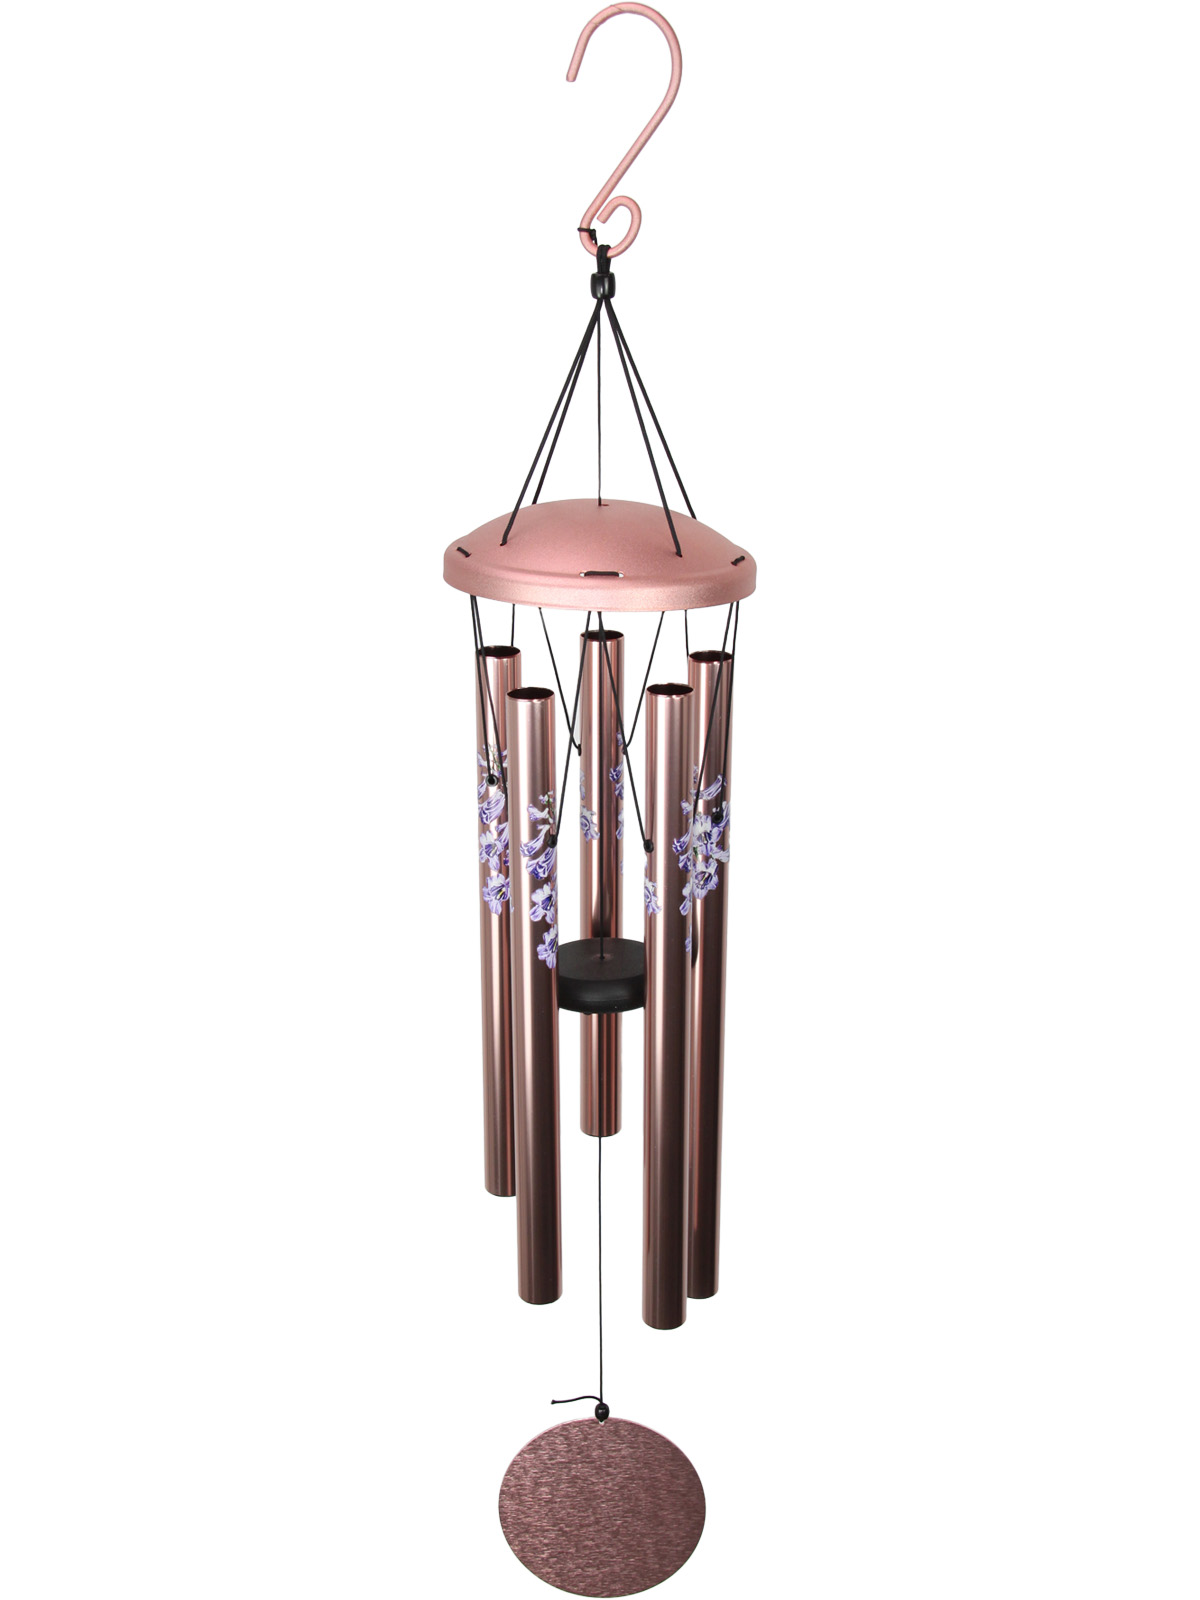 Flower Print Tuned Wind Chime (Rose Gold)